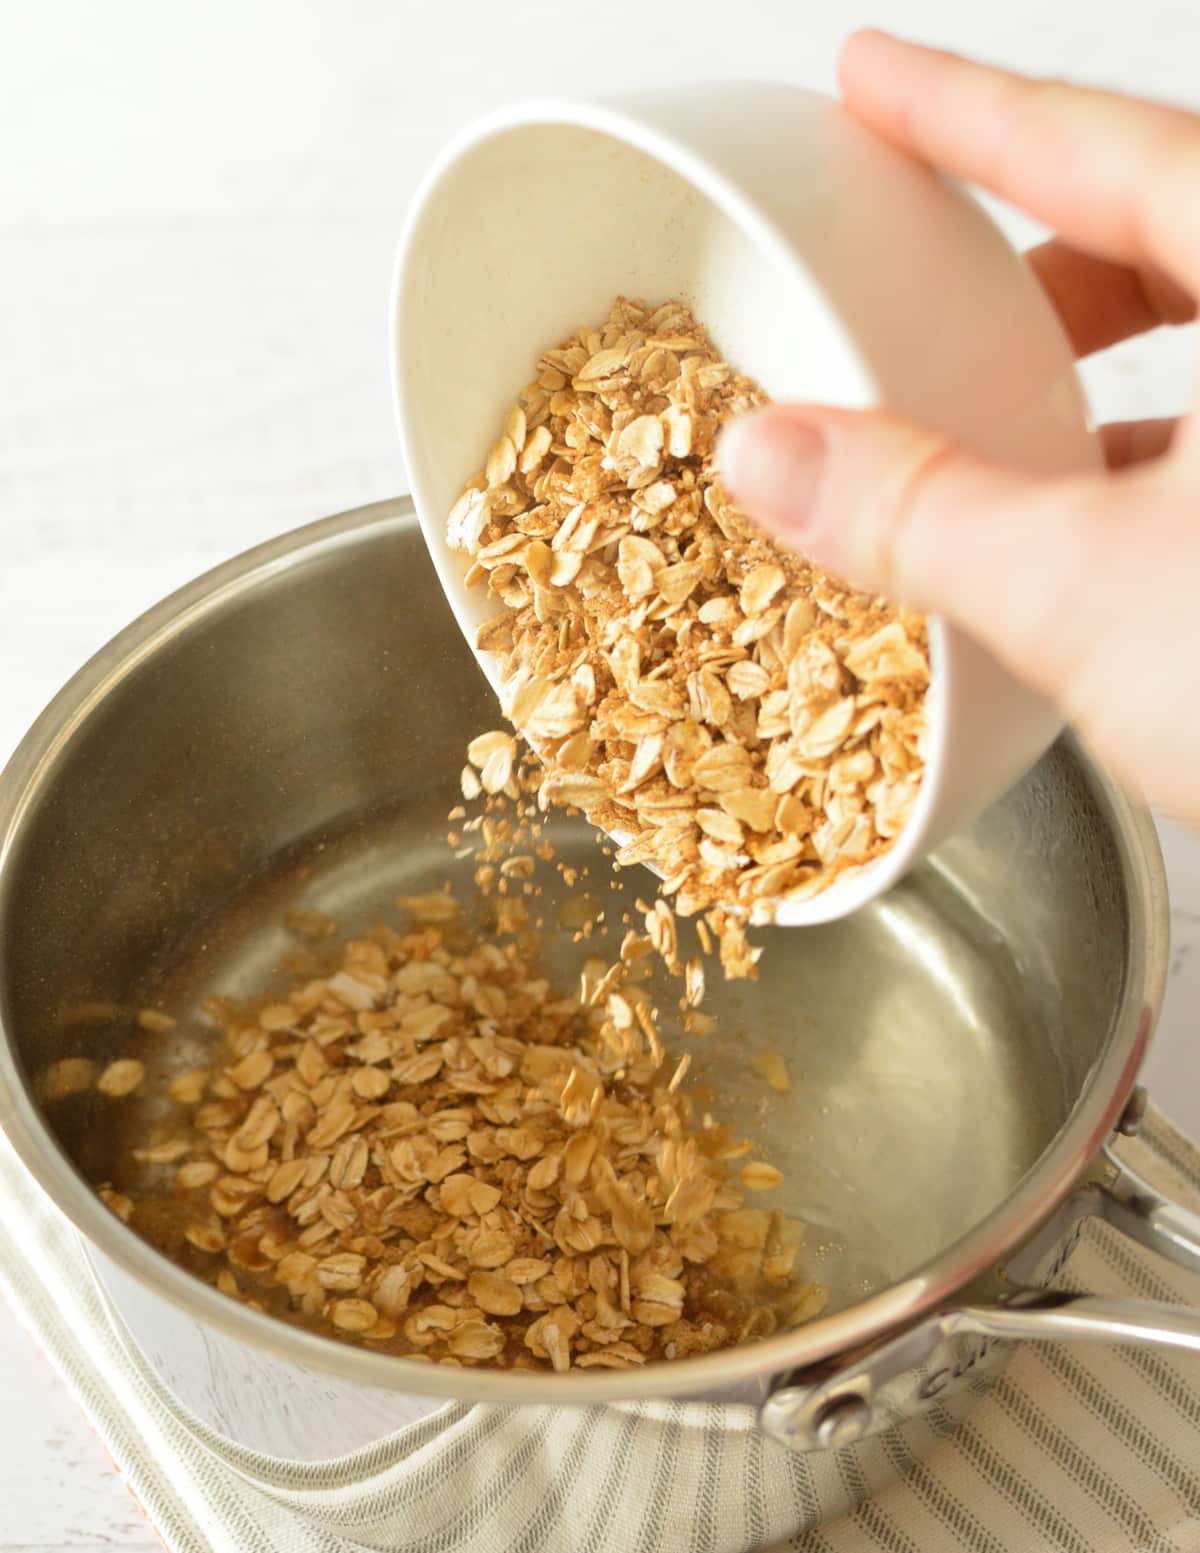 pouring the oats into a saucepan.